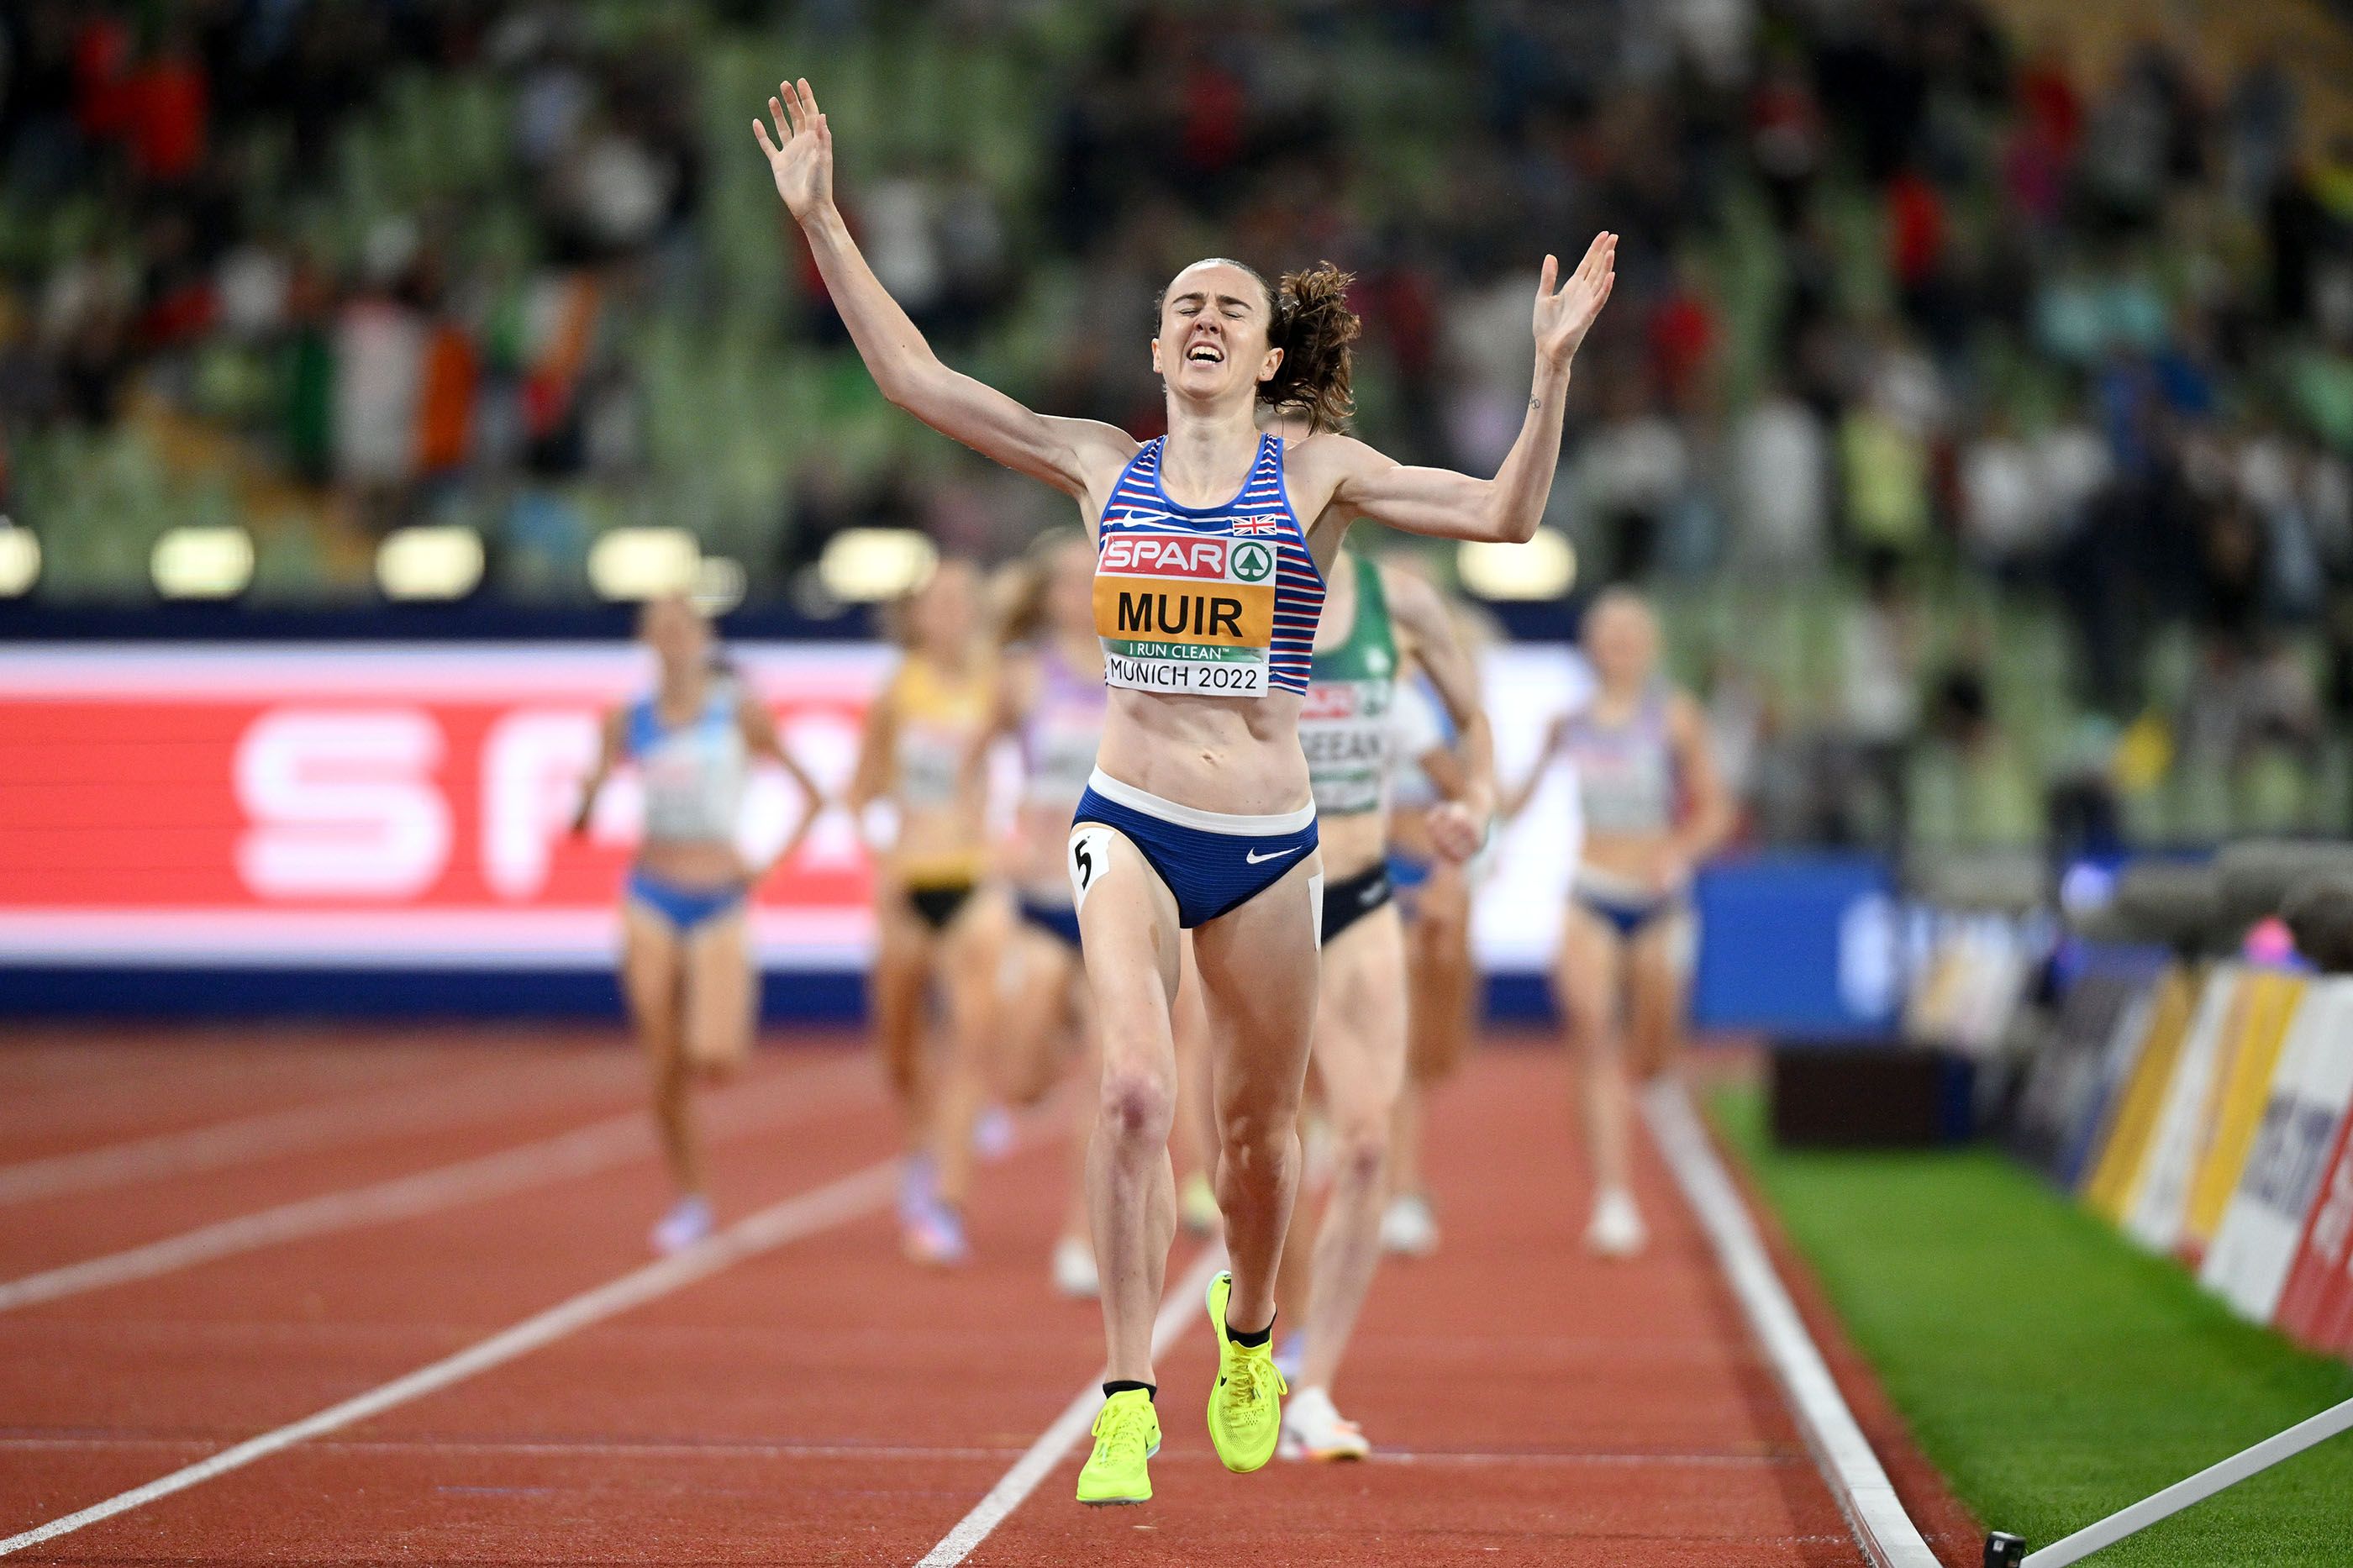 Laura Muir celebrates her 1500m victory at the European Championships in Munich